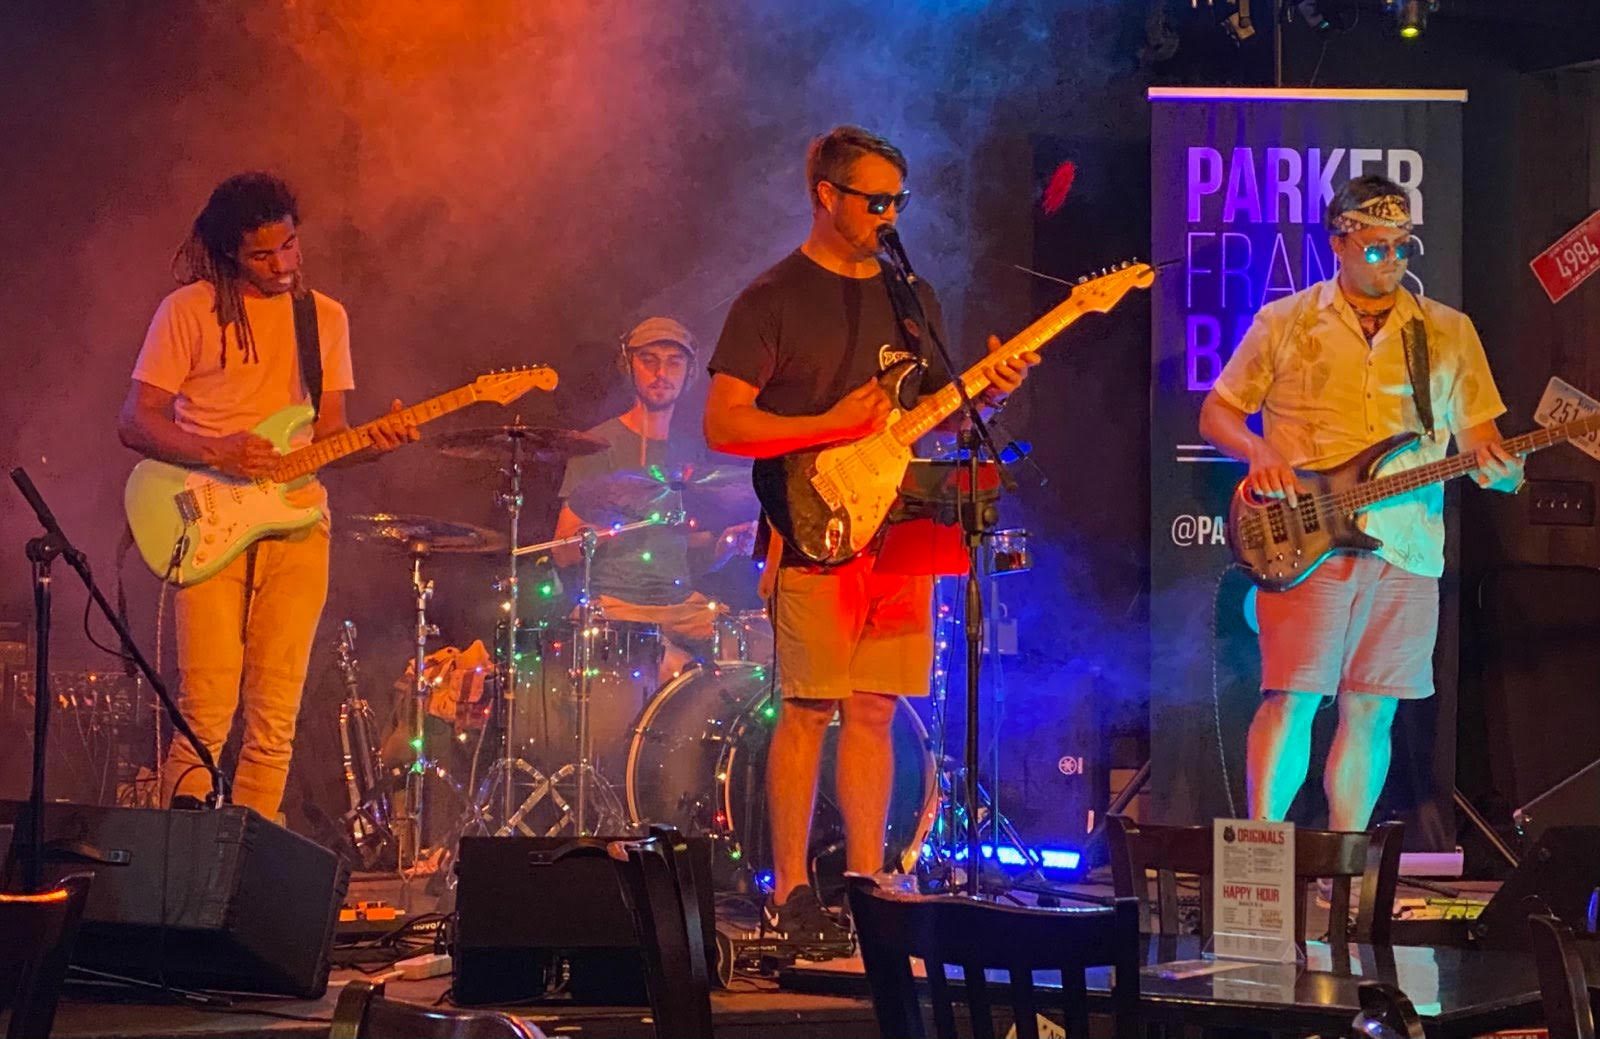 The Parker Francis Band